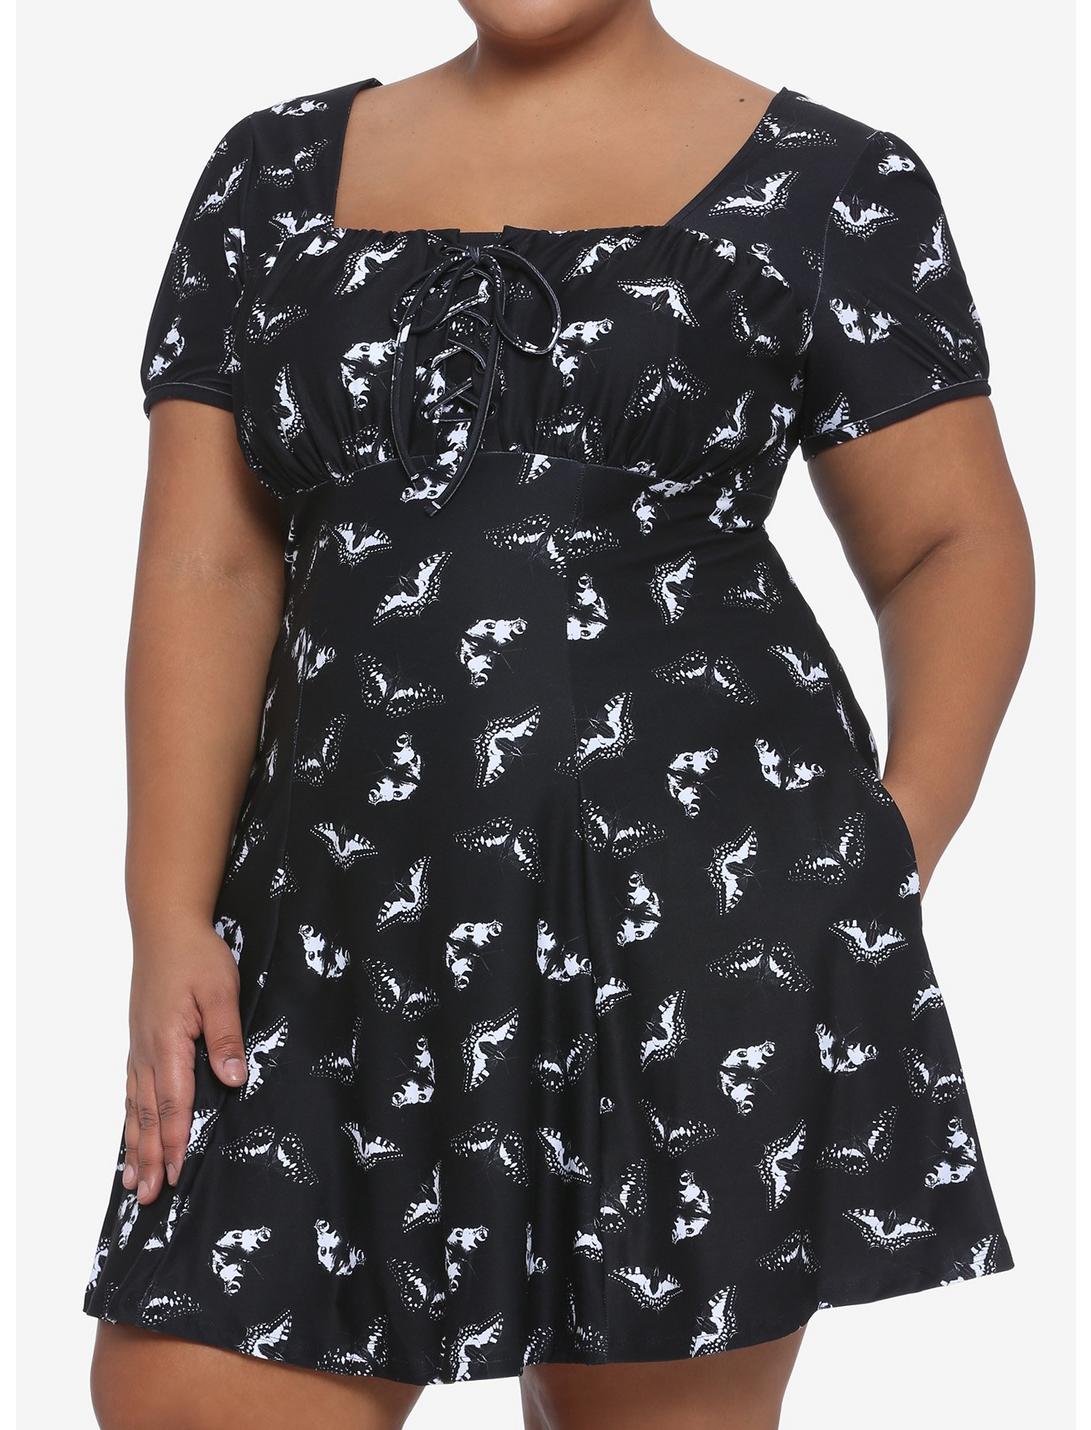 Butterfly Lace-Up Dress Plus Size, BLACK  WHITE, hi-res